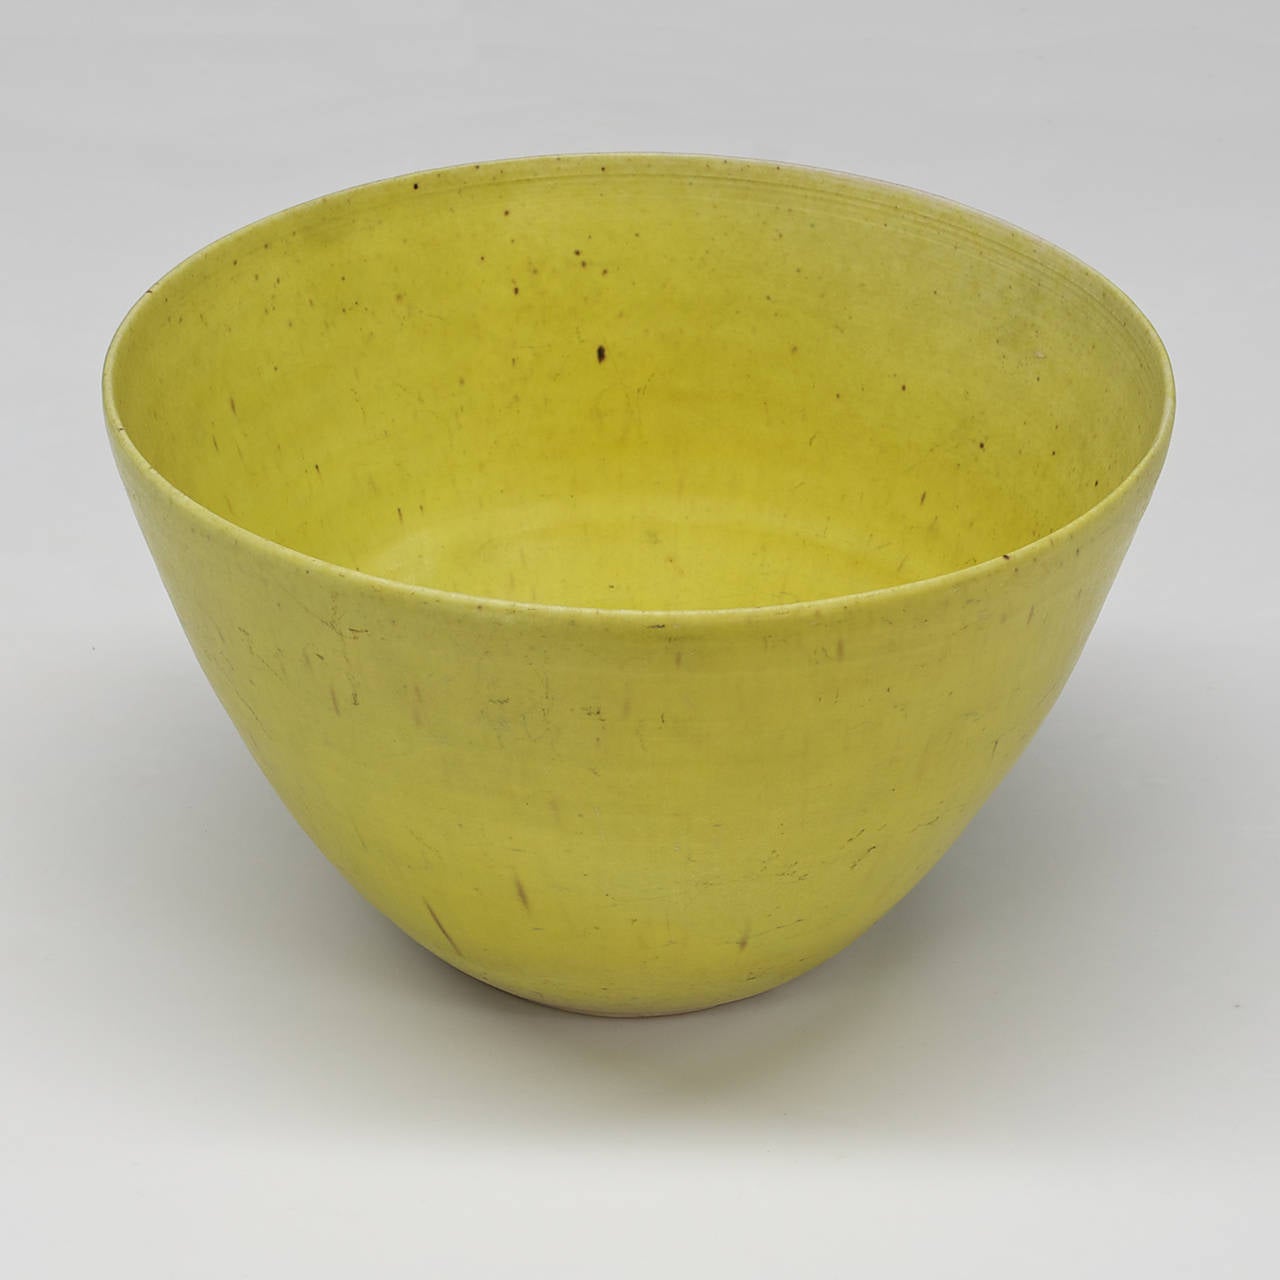 Edith Heath (1911–2005) founded Heath Ceramics, Sausalito California in 1948 after her solo pottery show at San Francisco’s Legion of Honor. Extremely rare, very few examples of her studio work exist outside of Museum collections.